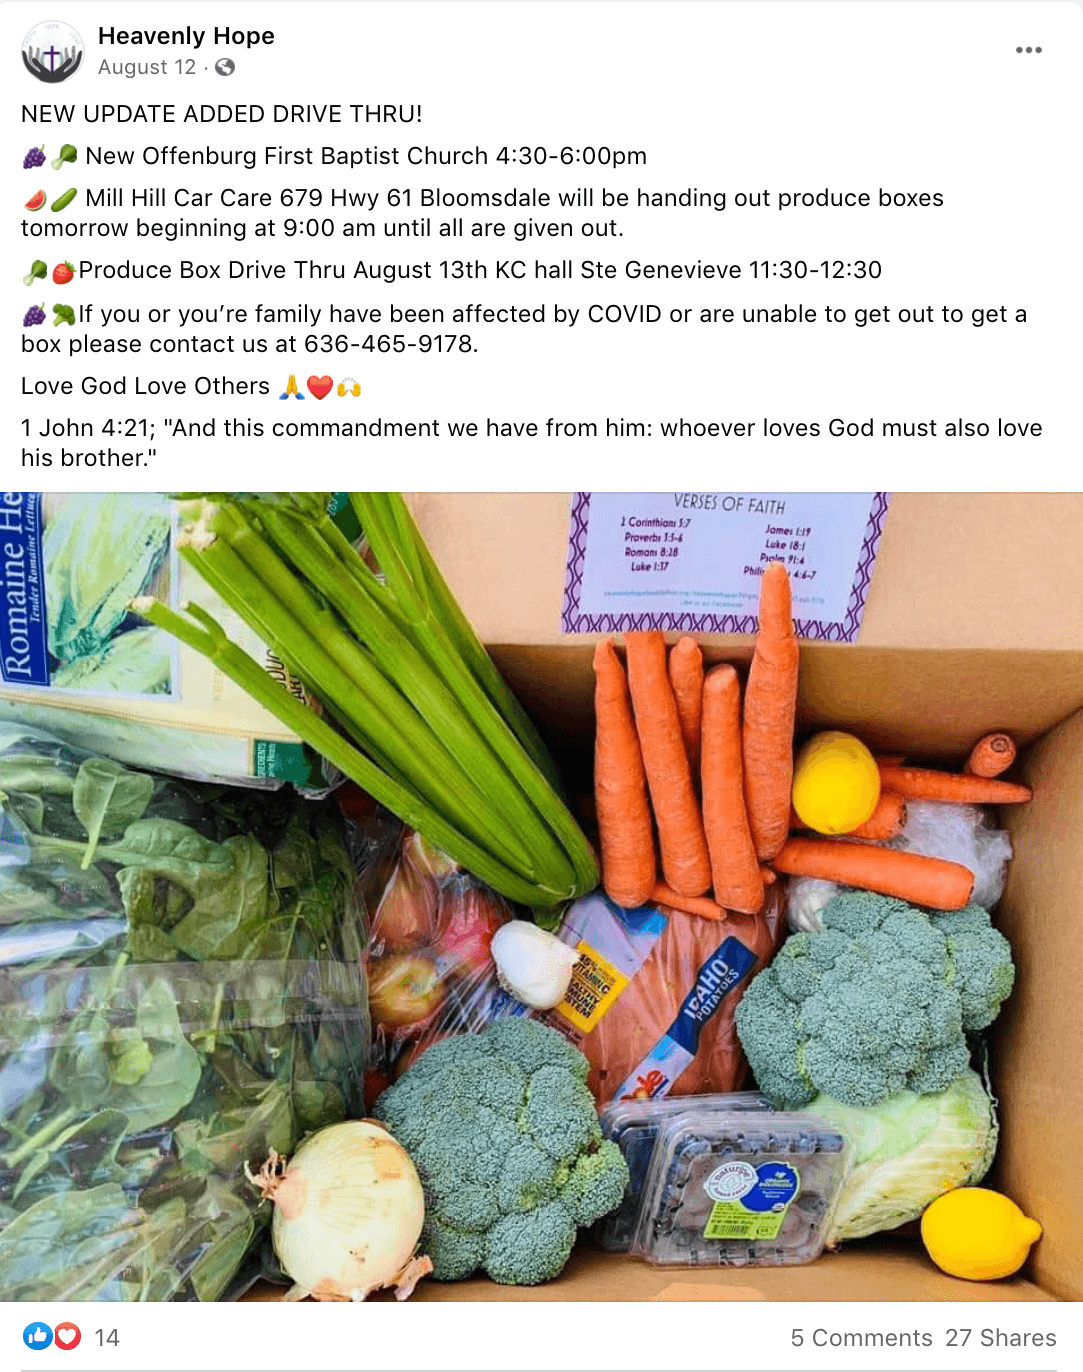 A screenshot of Heavenly Hope's Facebook showing a food box with a bible verse. September 2020